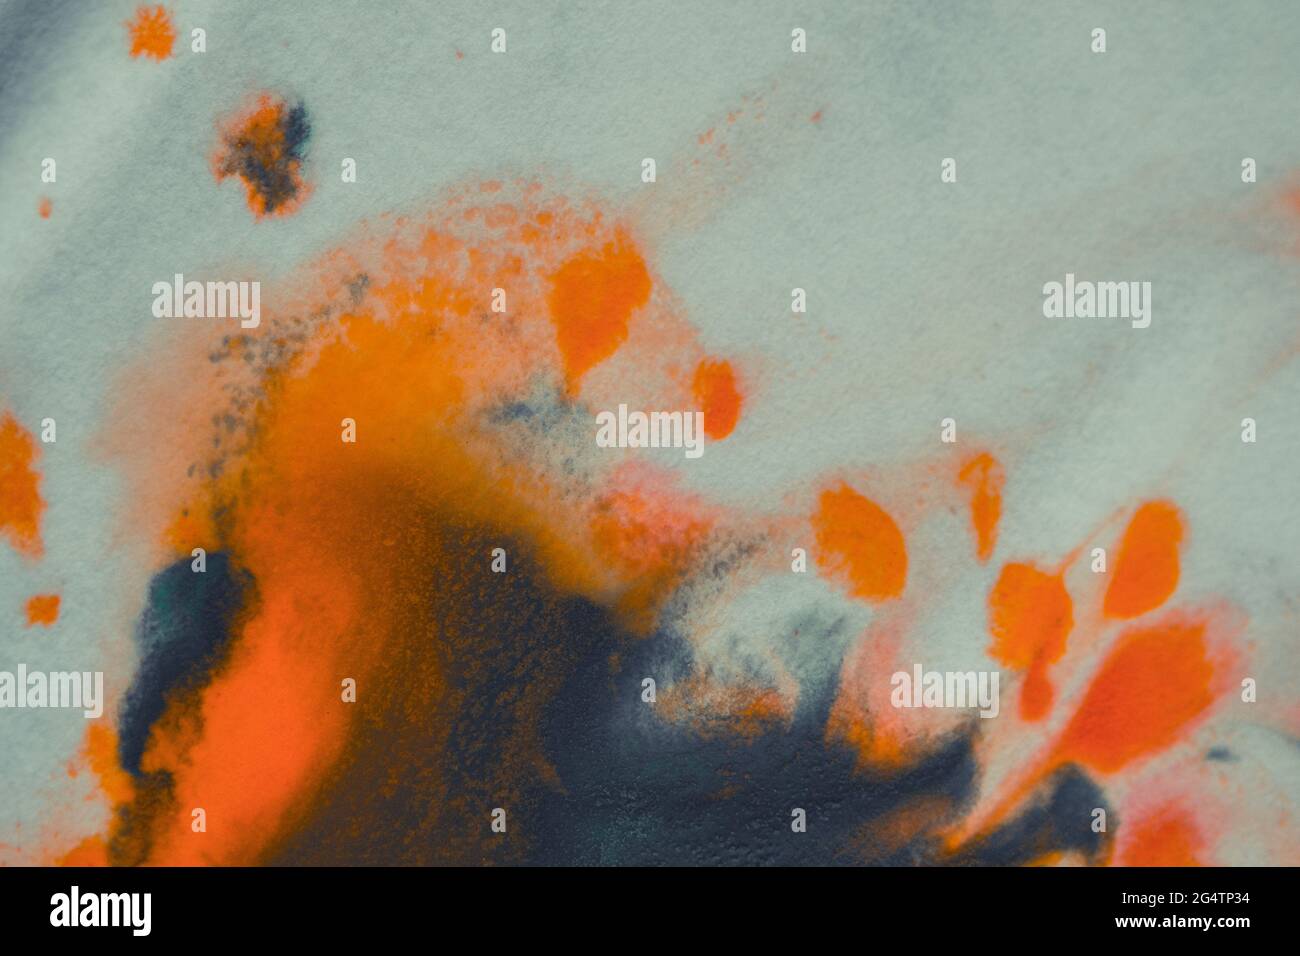 overflowing bright orange and dark blue paint on paper Stock Photo